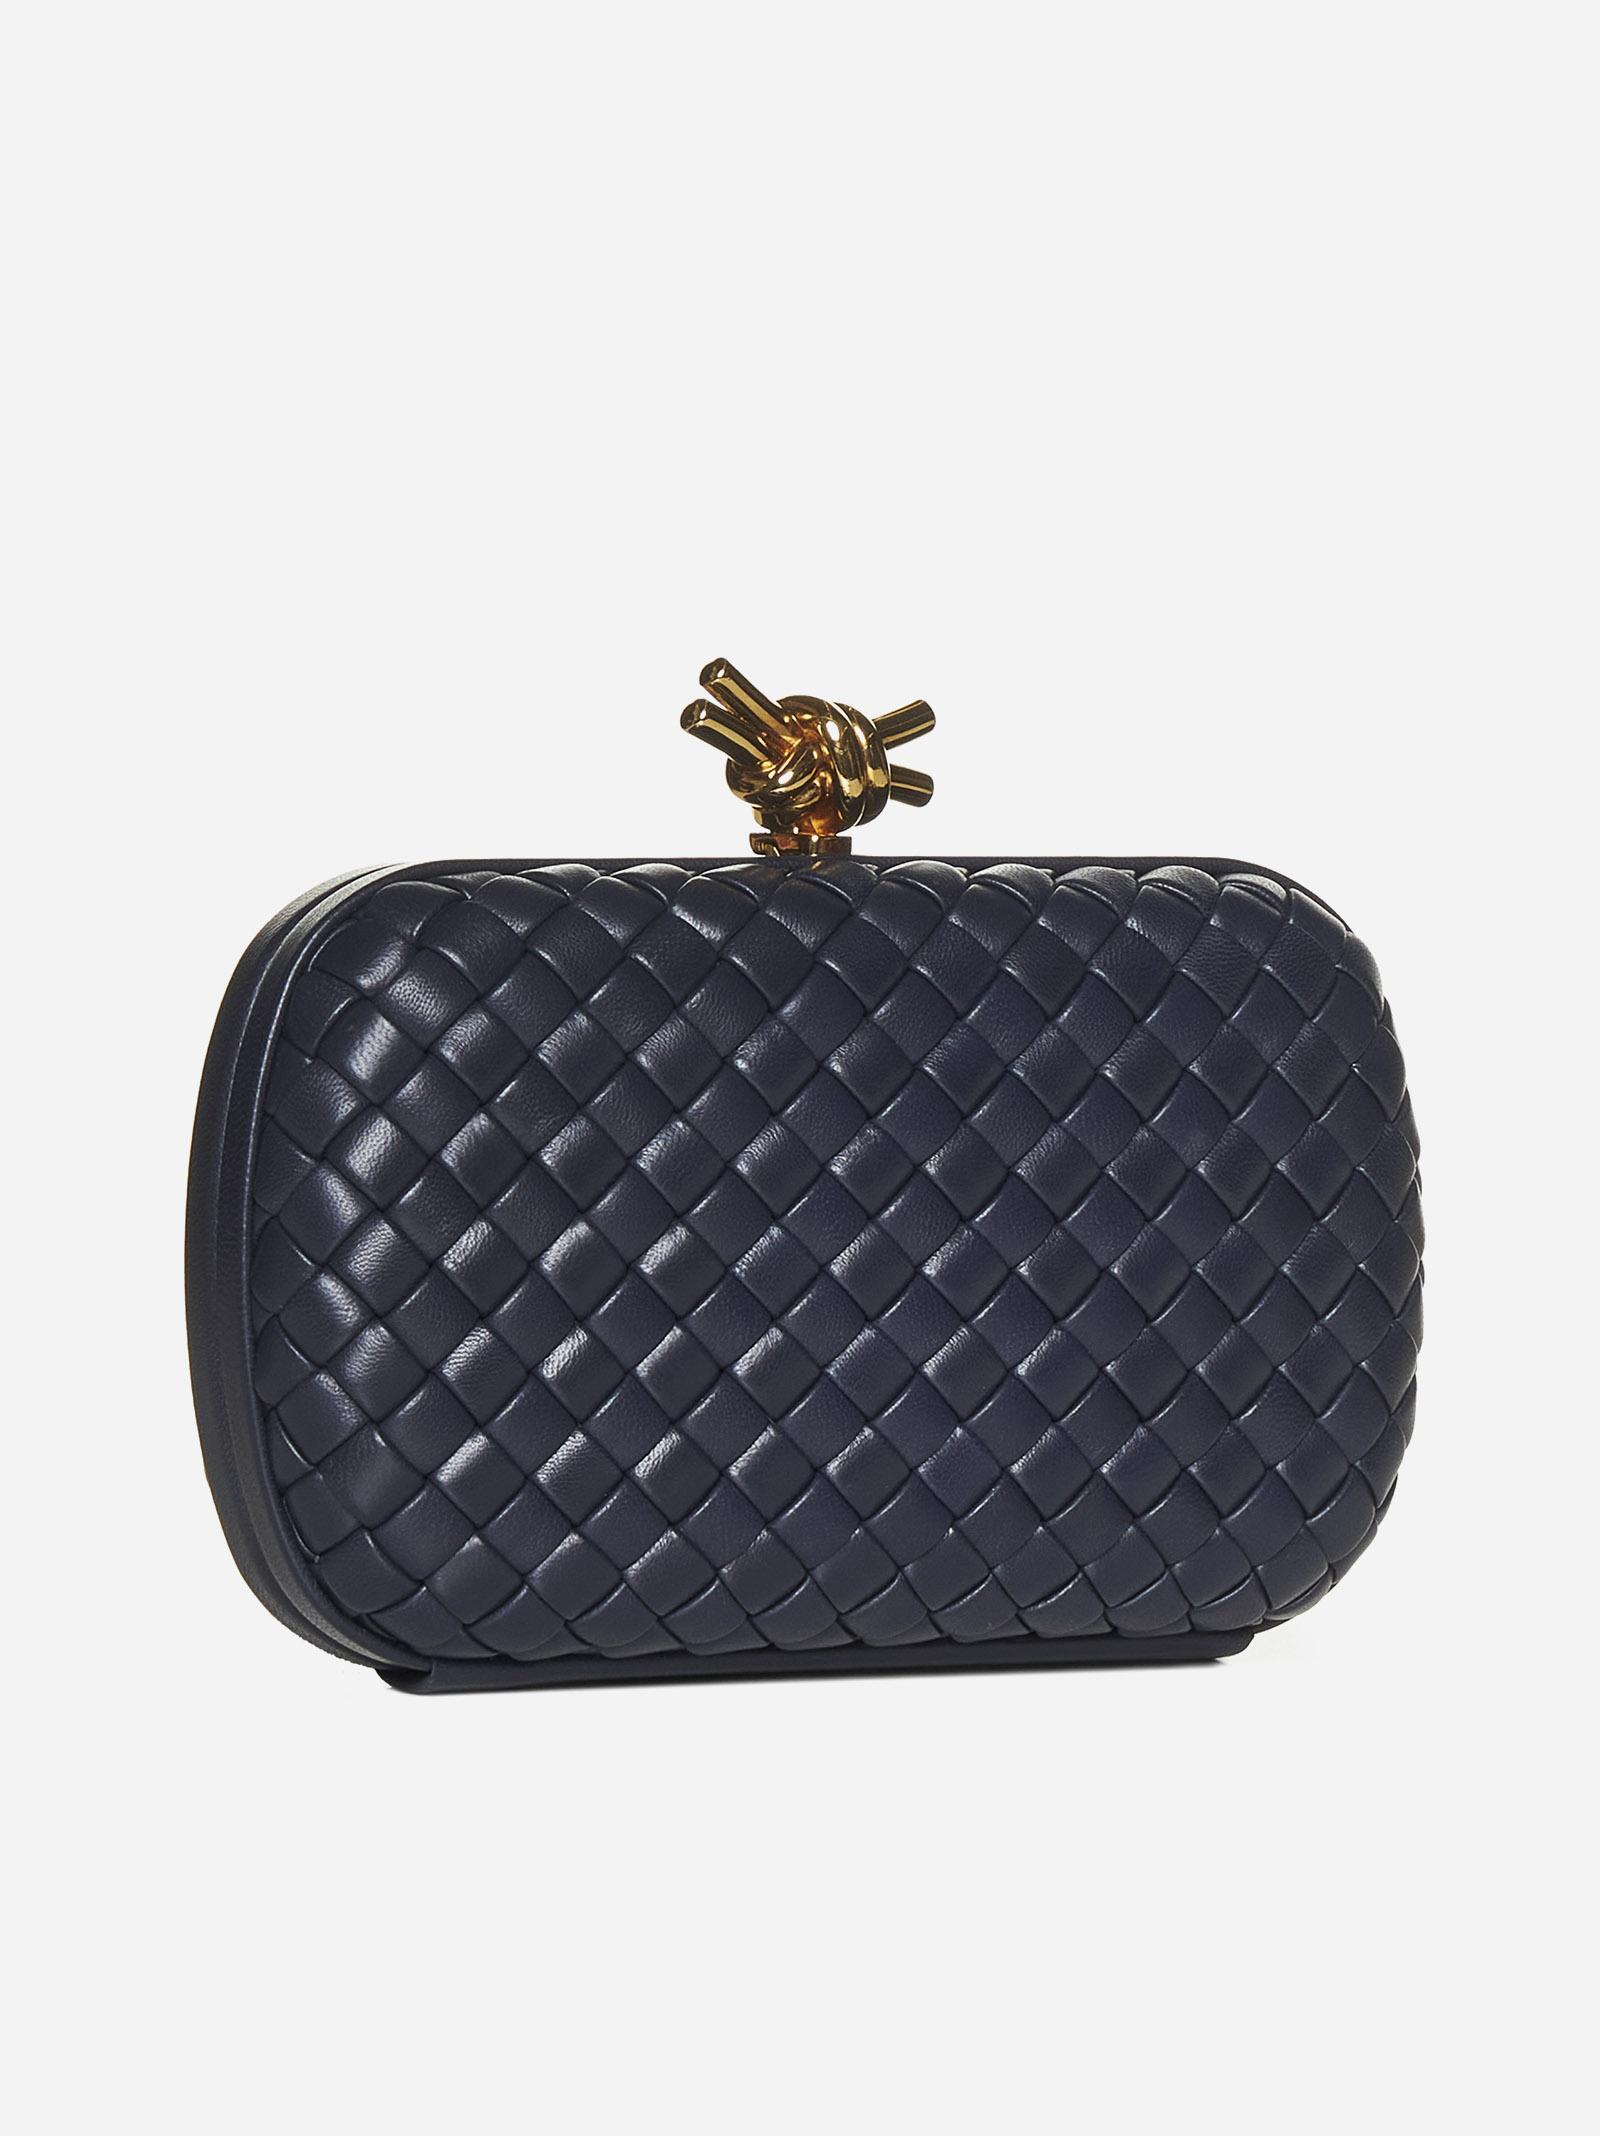 Knot padded intrecciato leather clutch